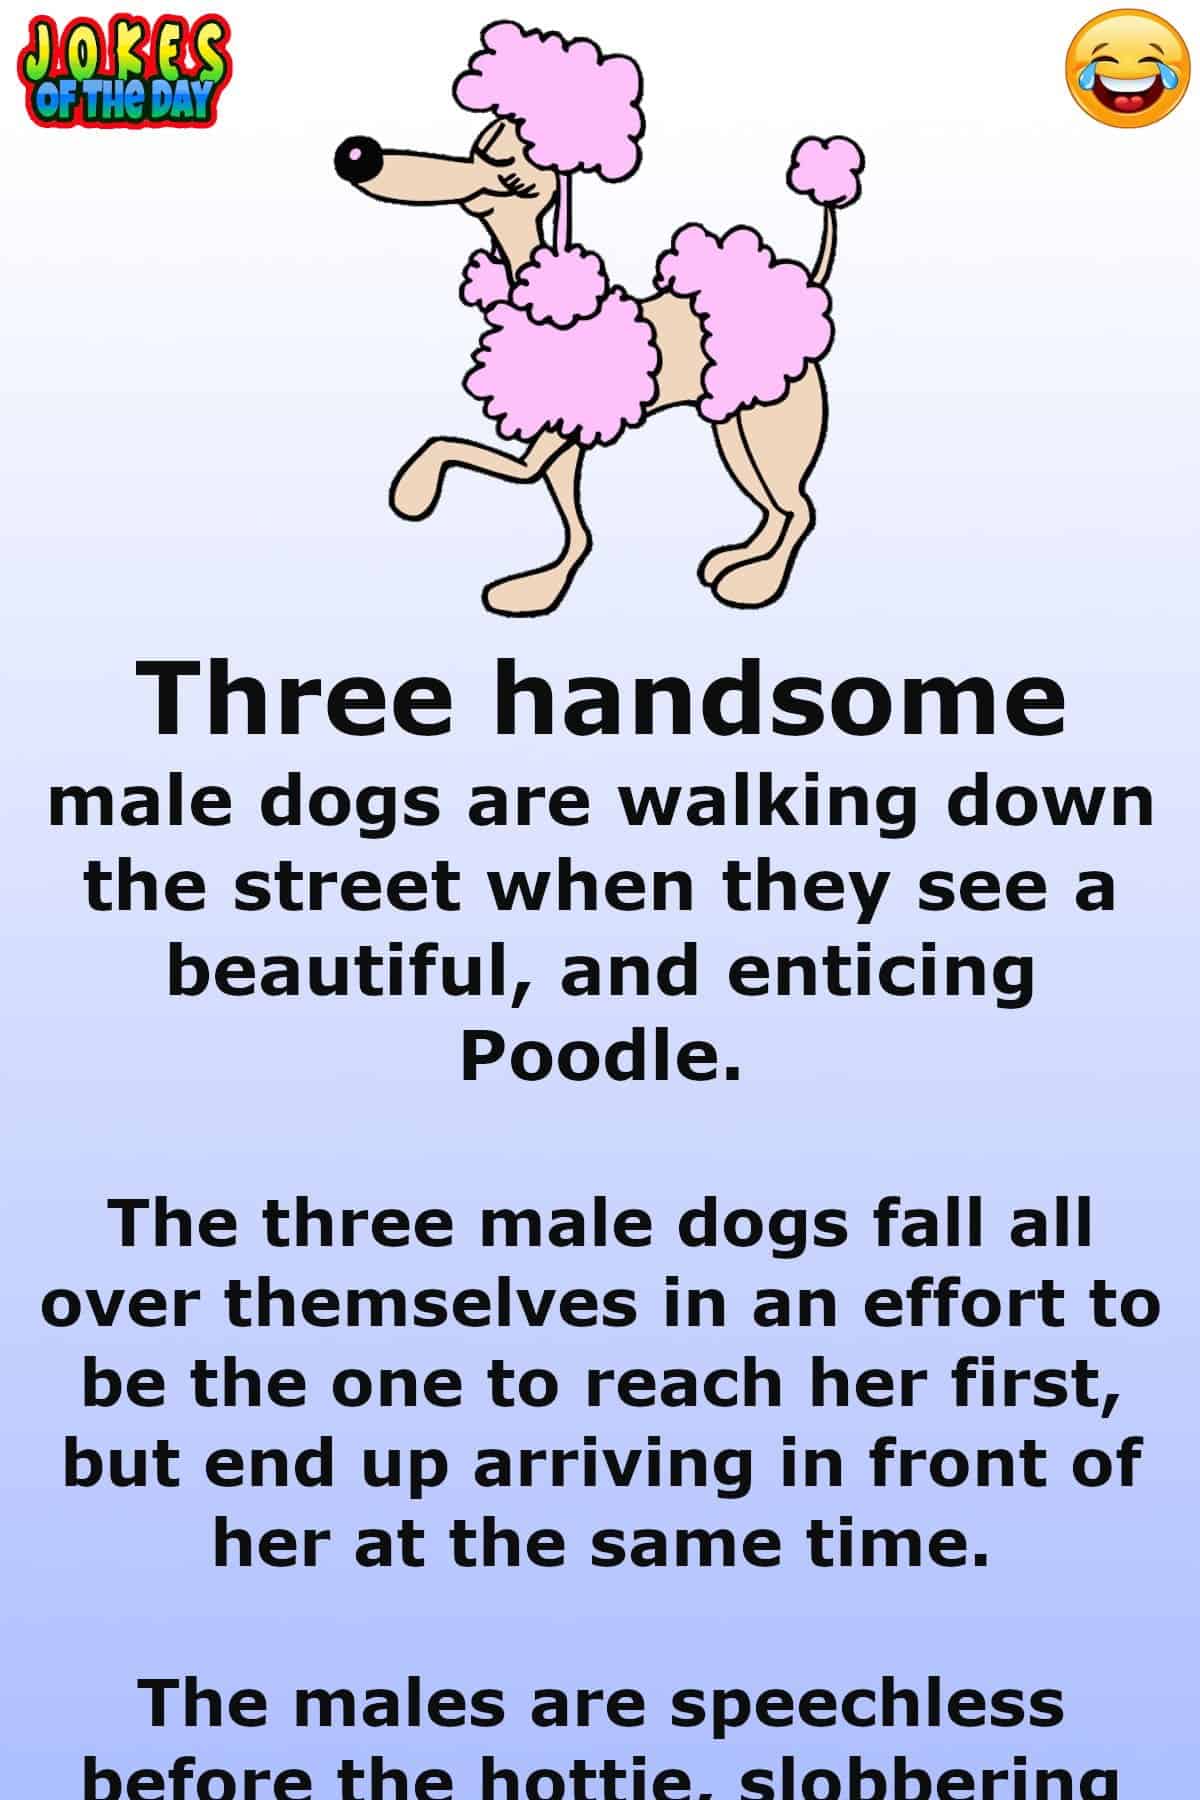 LOL - Three dogs compete over a hot poodle